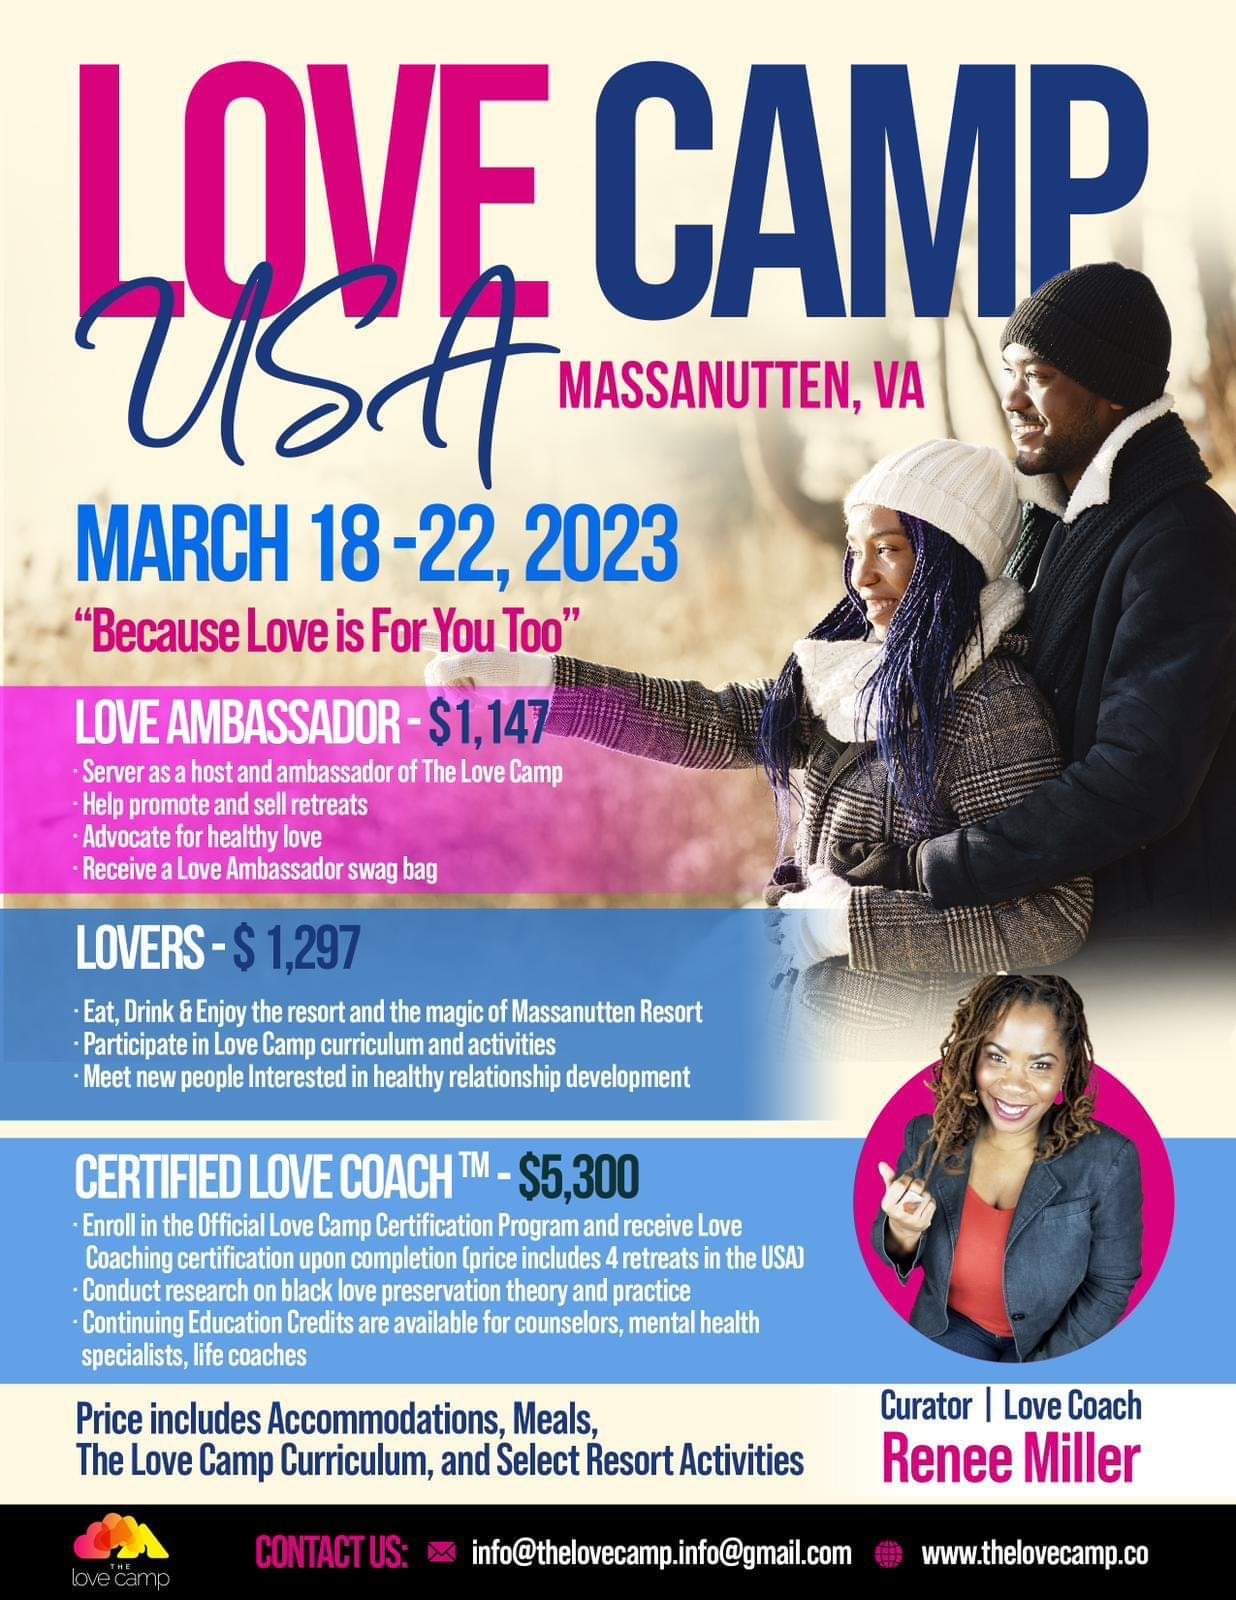 The Love Camp, A Unique Coaching Curriculum Exploring the Black Male-Female Love Journey, Launches First USA Retreat; Adds New U.S., International Destinations